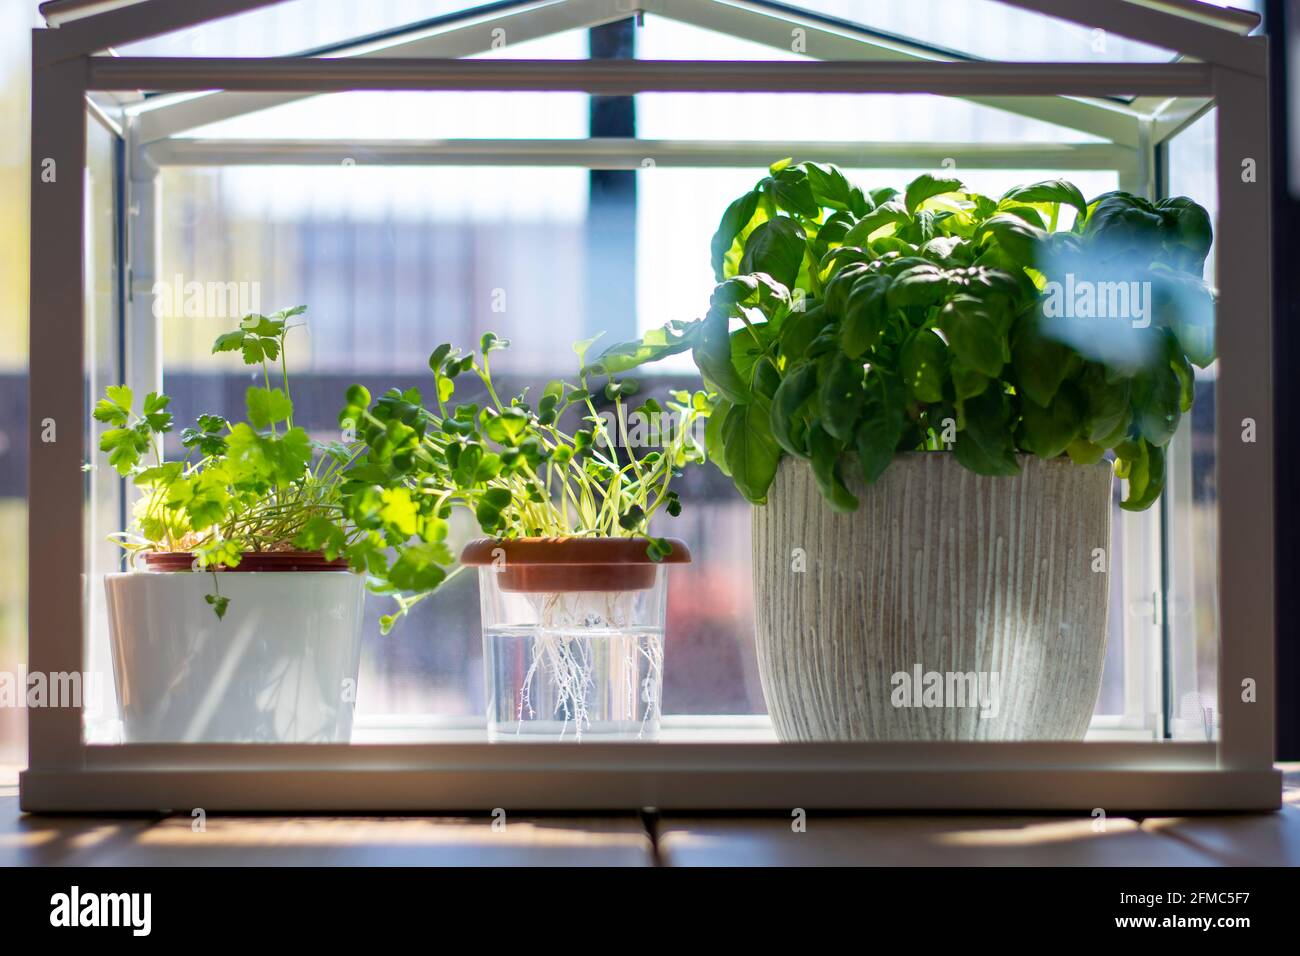 Miniature greenhouse with fresh herbs. Growing basil, parsley and watercress herbs in hydroponic system. Stock Photo